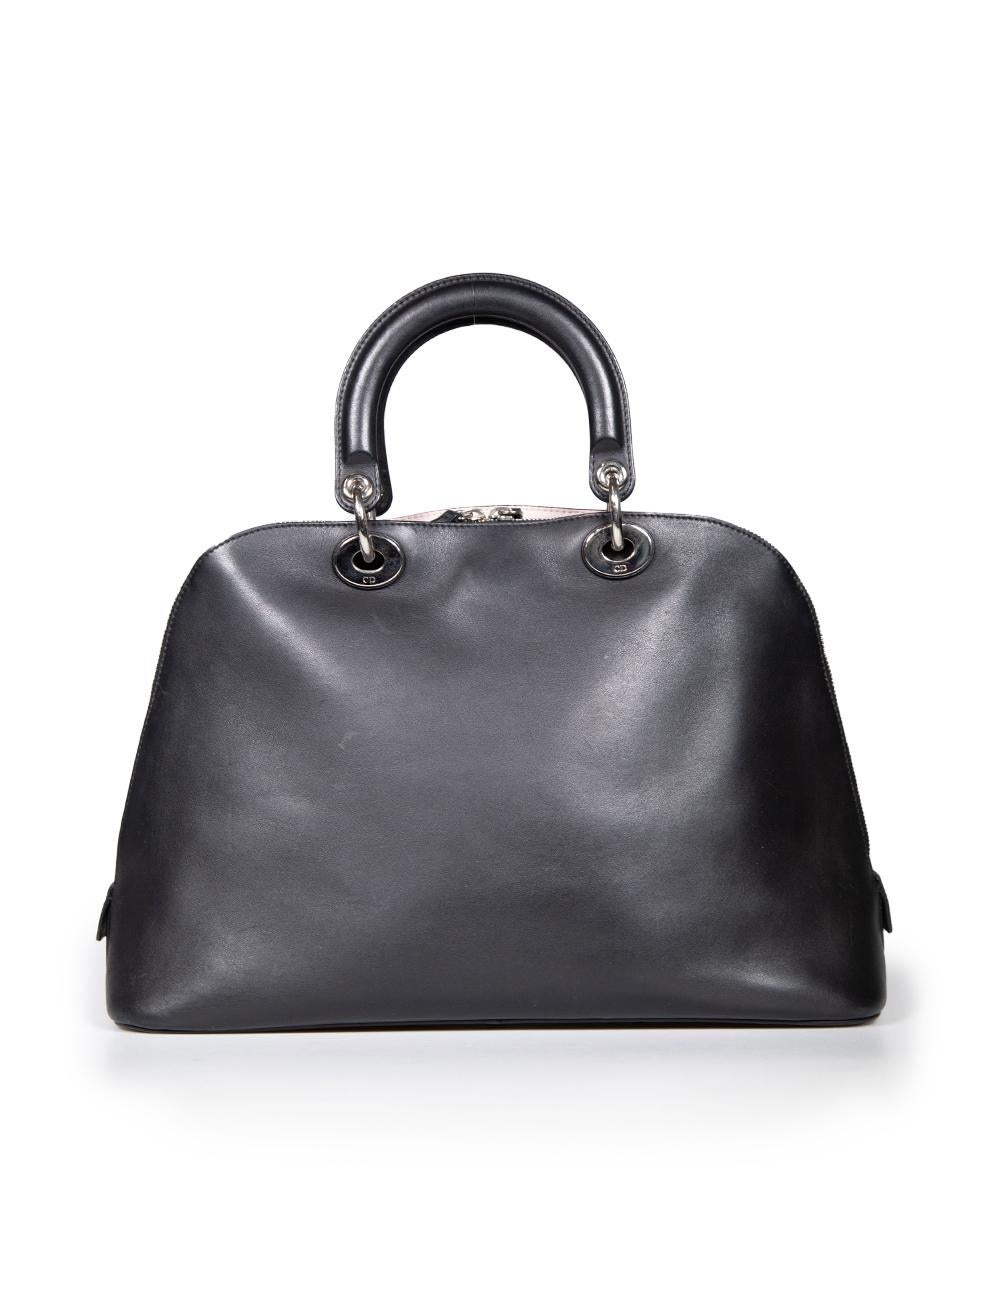 Dior 2012 Black Leather Diorissimo Top-Handle Bag In Good Condition In London, GB